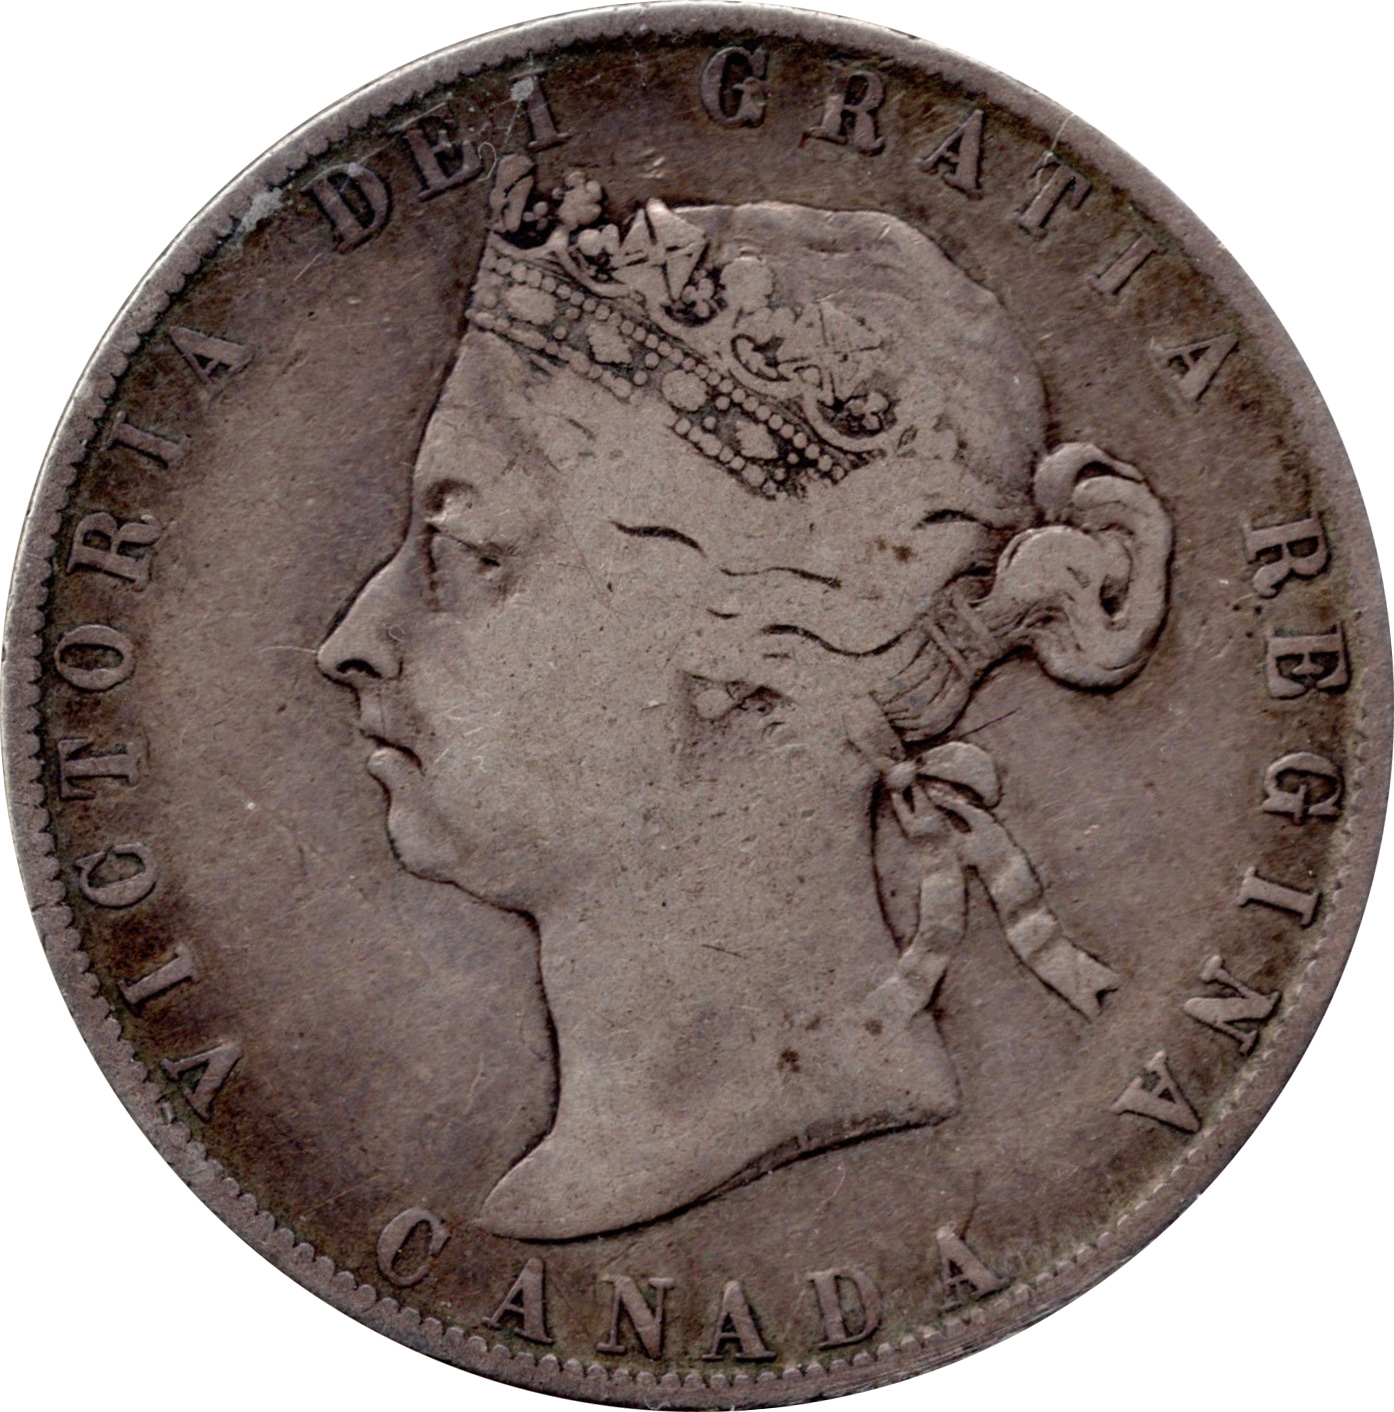 VG-8 - 50 cents 1870 to 1901 - Victoria